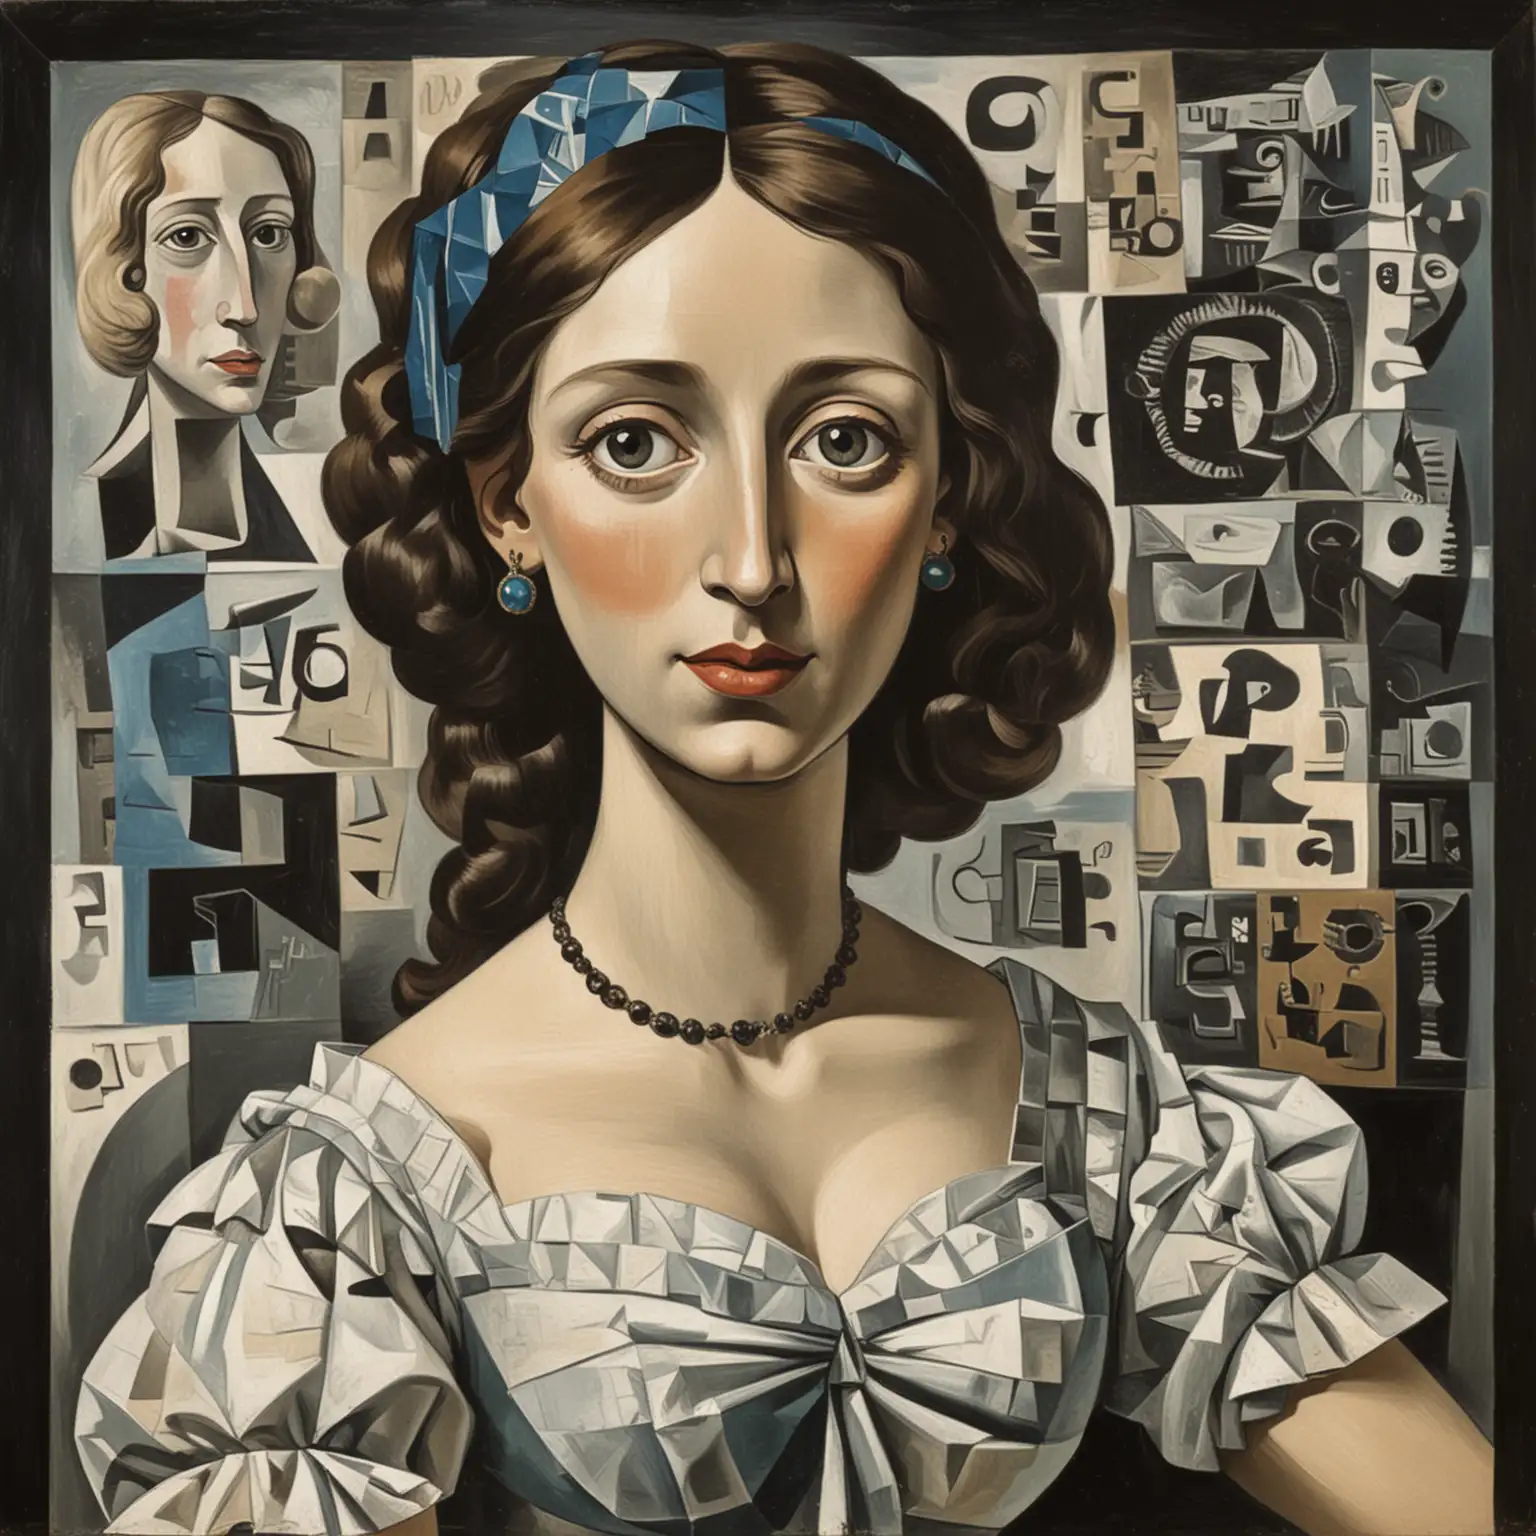 A cubist painting by Pablo Picasso of Ada Lovelace